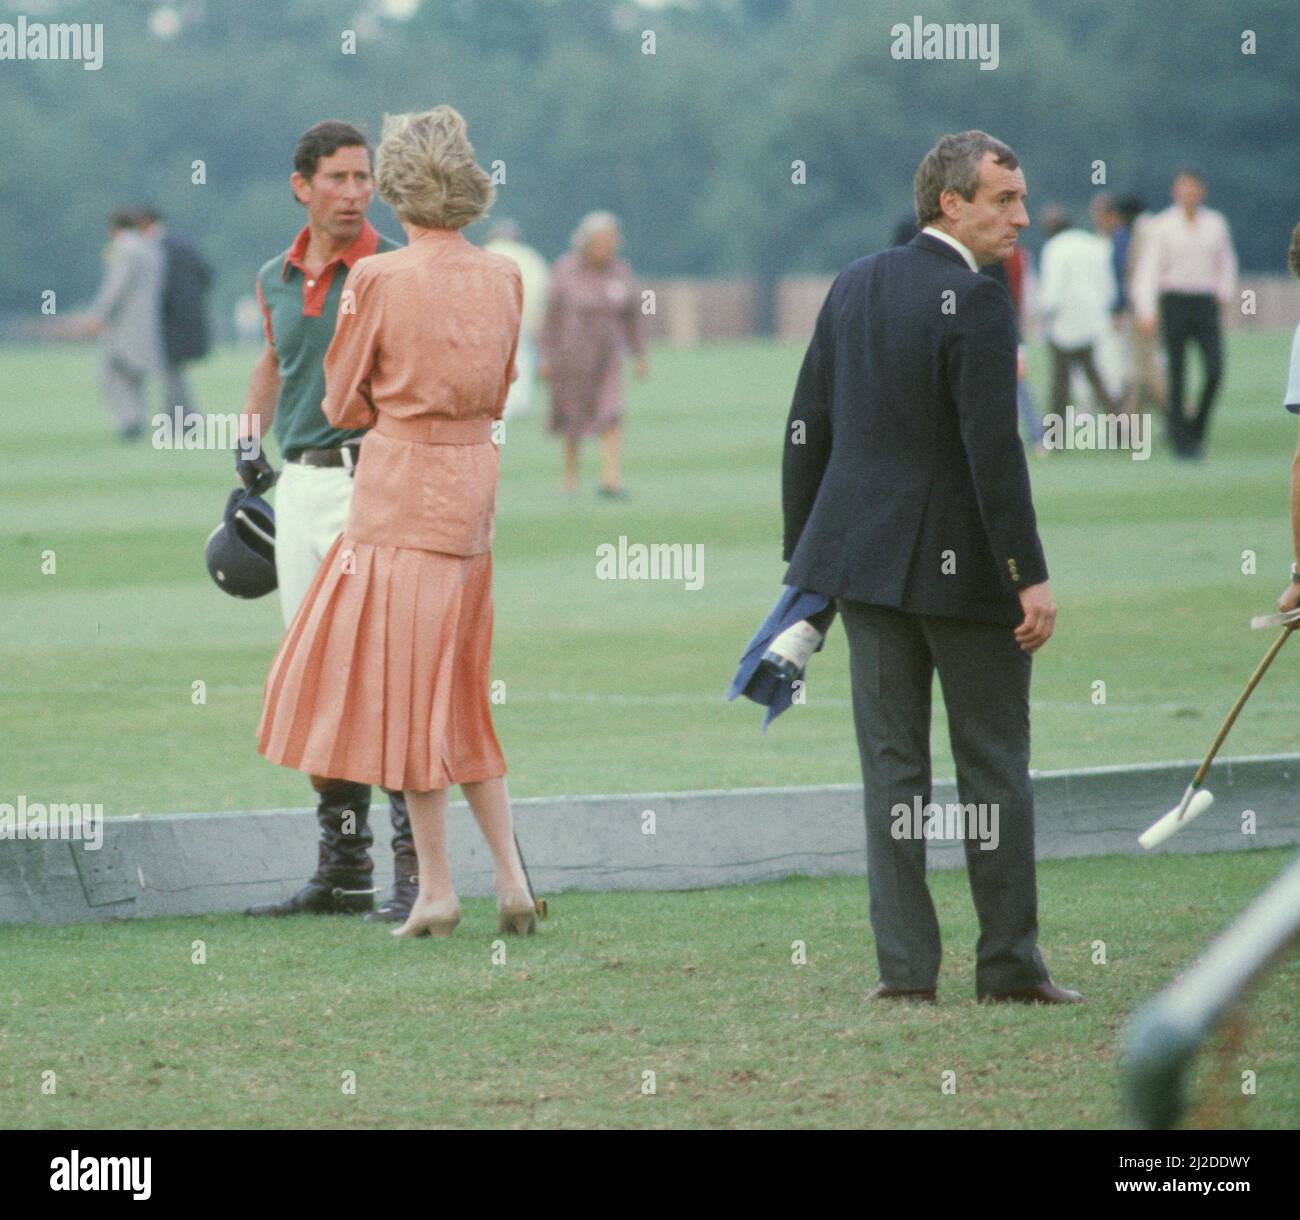 https://c8.alamy.com/comp/2J2DDWY/hrh-princess-diana-the-princess-of-wales-and-hrh-prince-charles-the-prince-of-wales-at-guards-polo-at-windsor-berkshire-sanding-to-the-behind-right-of-the-princess-is-her-bodyguard-barry-mannakee-wearing-the-dark-suit-and-holding-a-bottle-of-drink-picture-taken-20th-june-1985-2J2DDWY.jpg